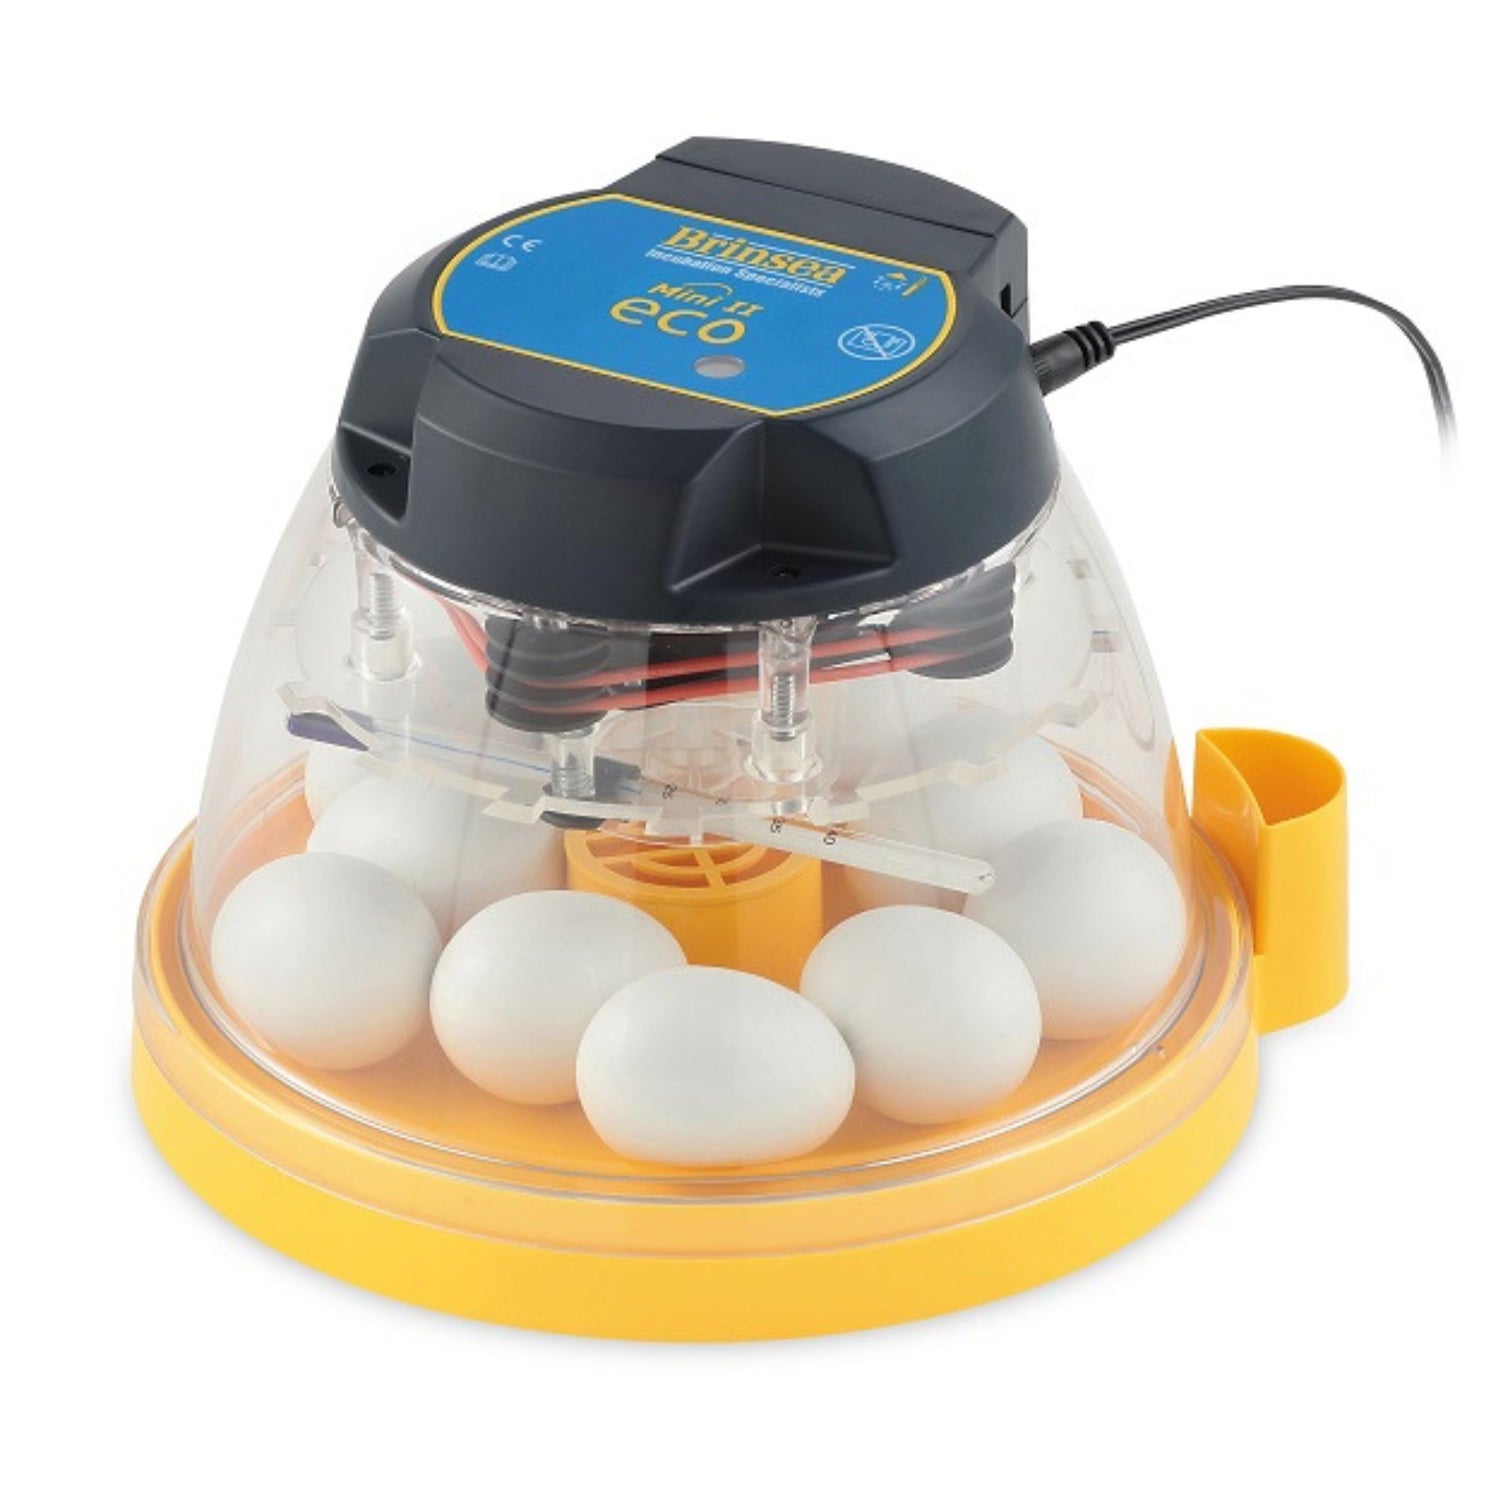 The Brinsea Mini II Eco Incubator is a best seller at My Pet Chicken. 